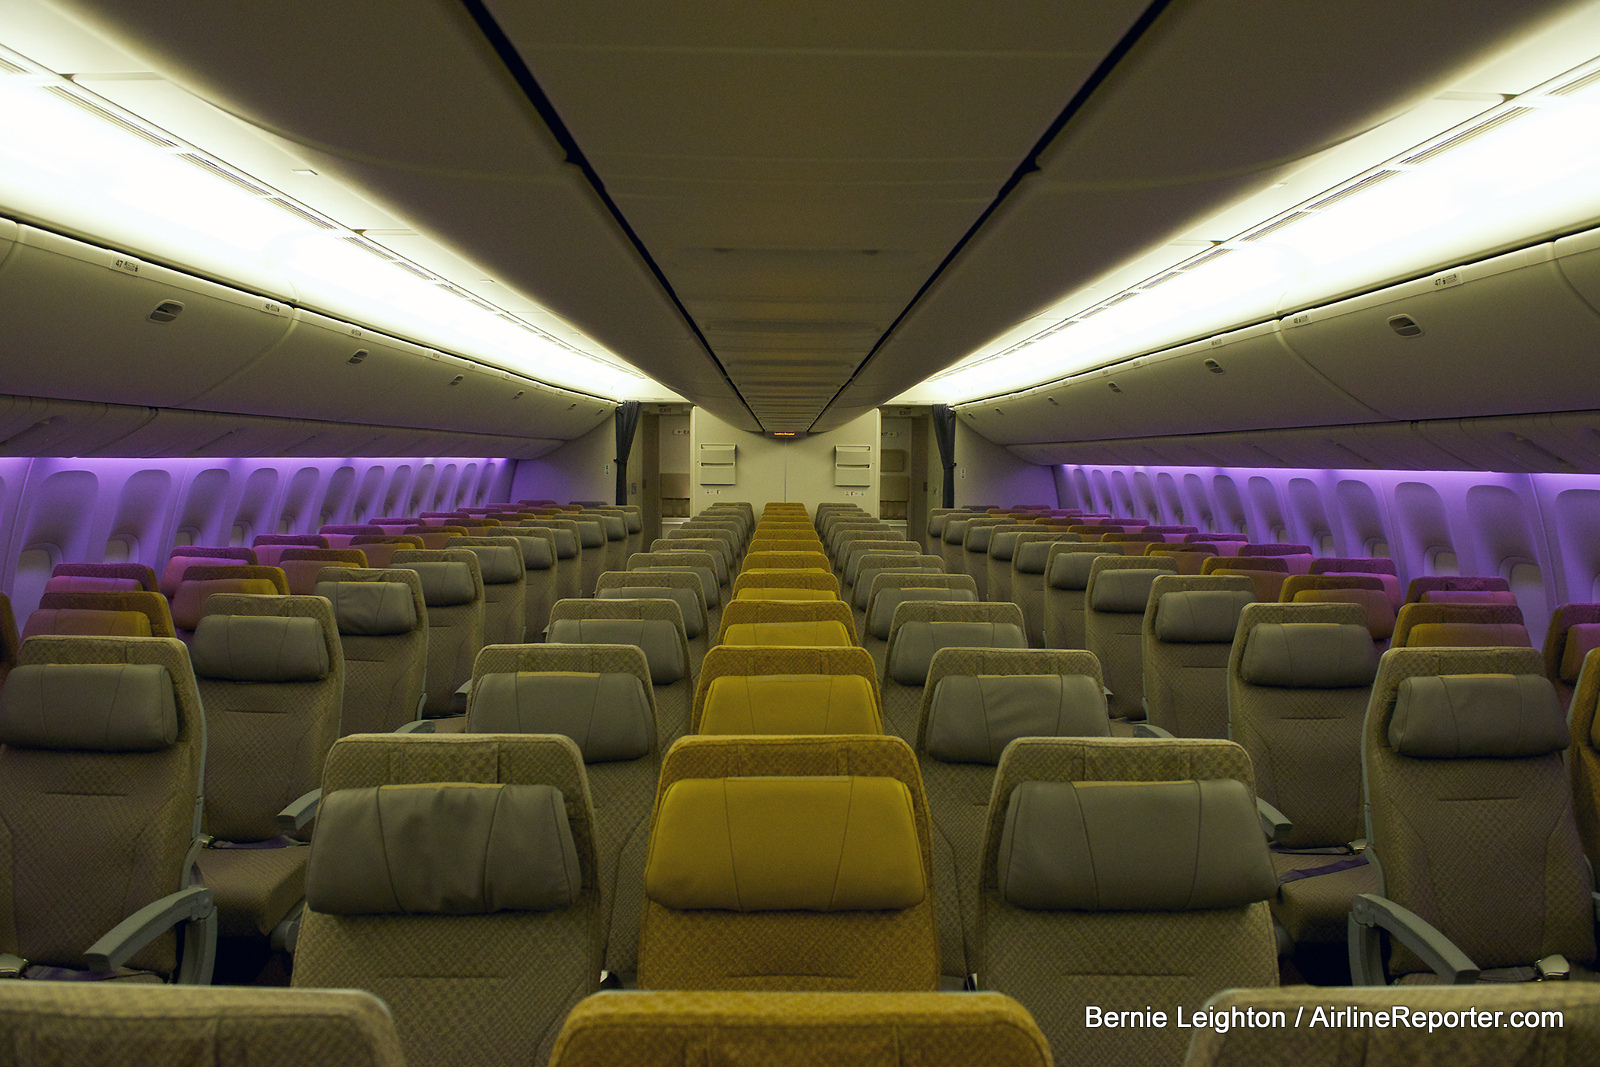 Inside Look 9 Vs 10 Abreast Economy Seating In The 777